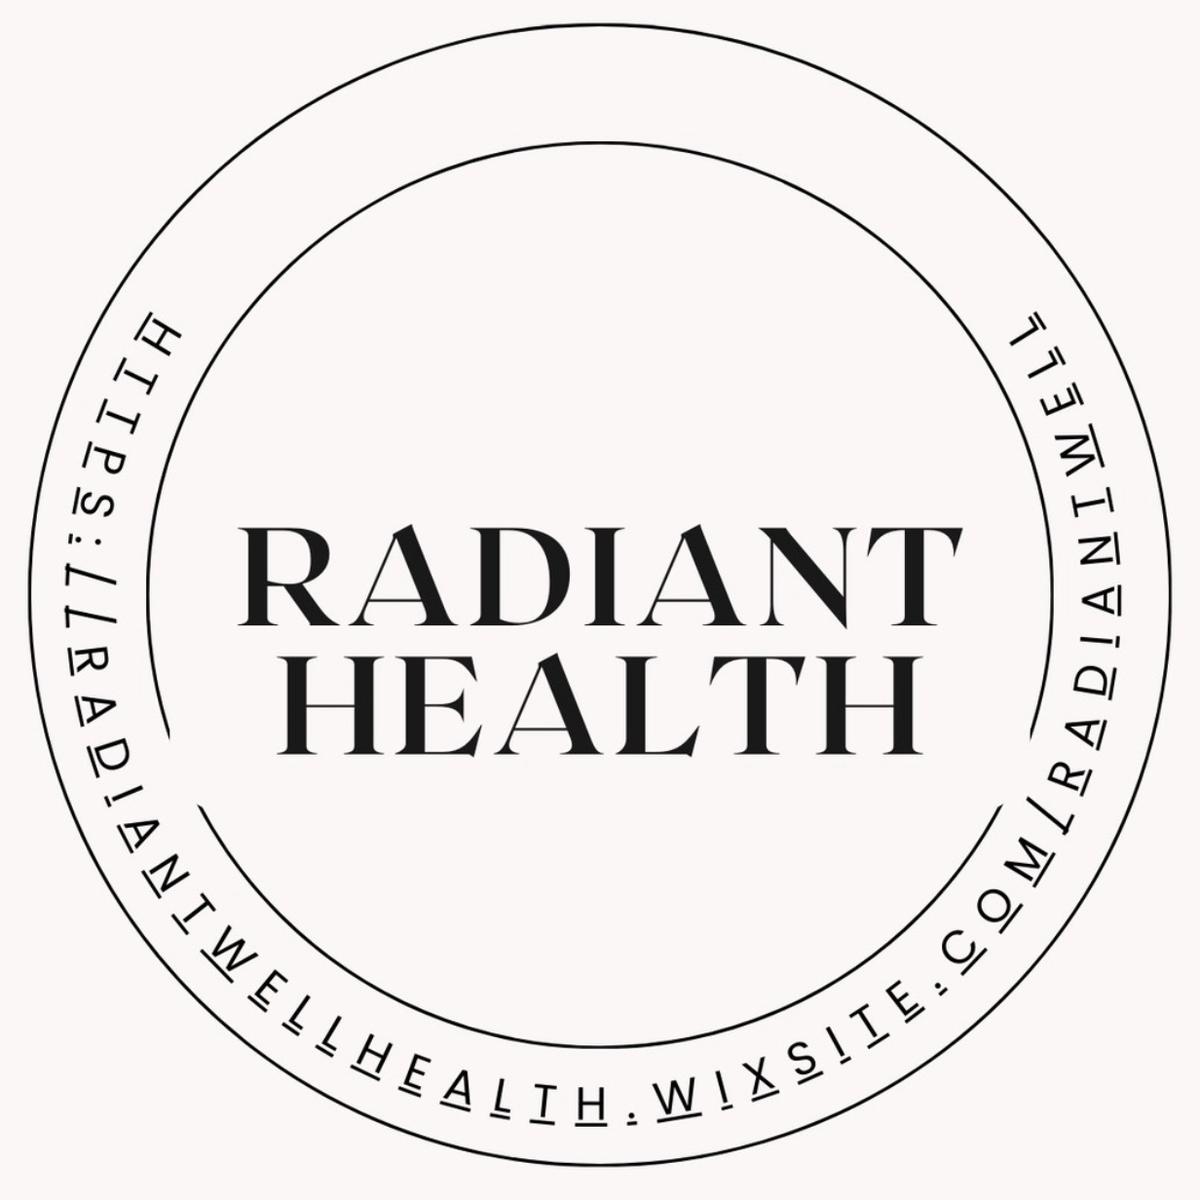 Radiant Health 's images